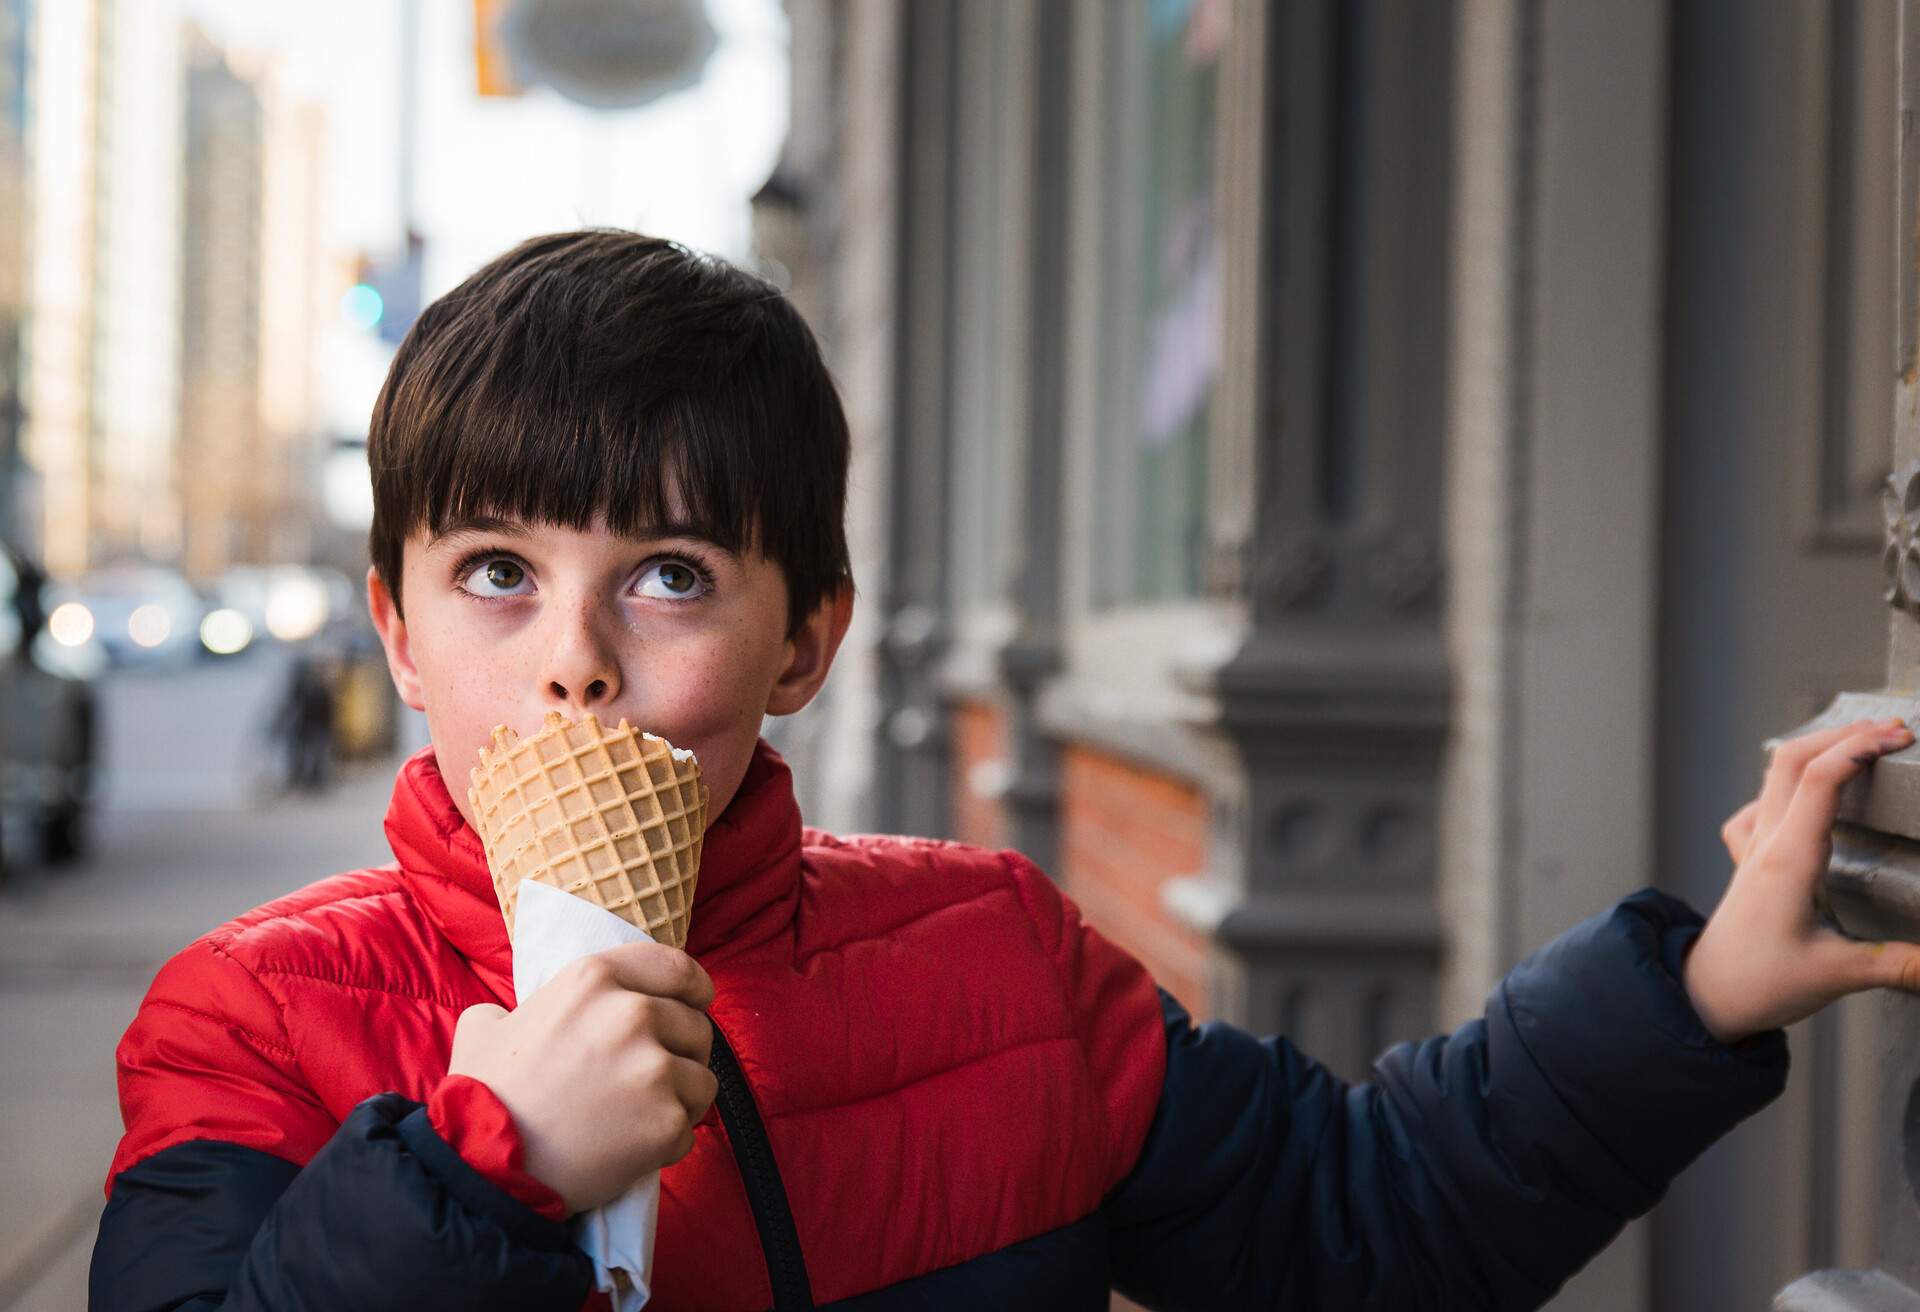 THEME_FOOD_PEOPLE_BOY_KID_EATING_ICE_CREAM_GettyImages-1082121142